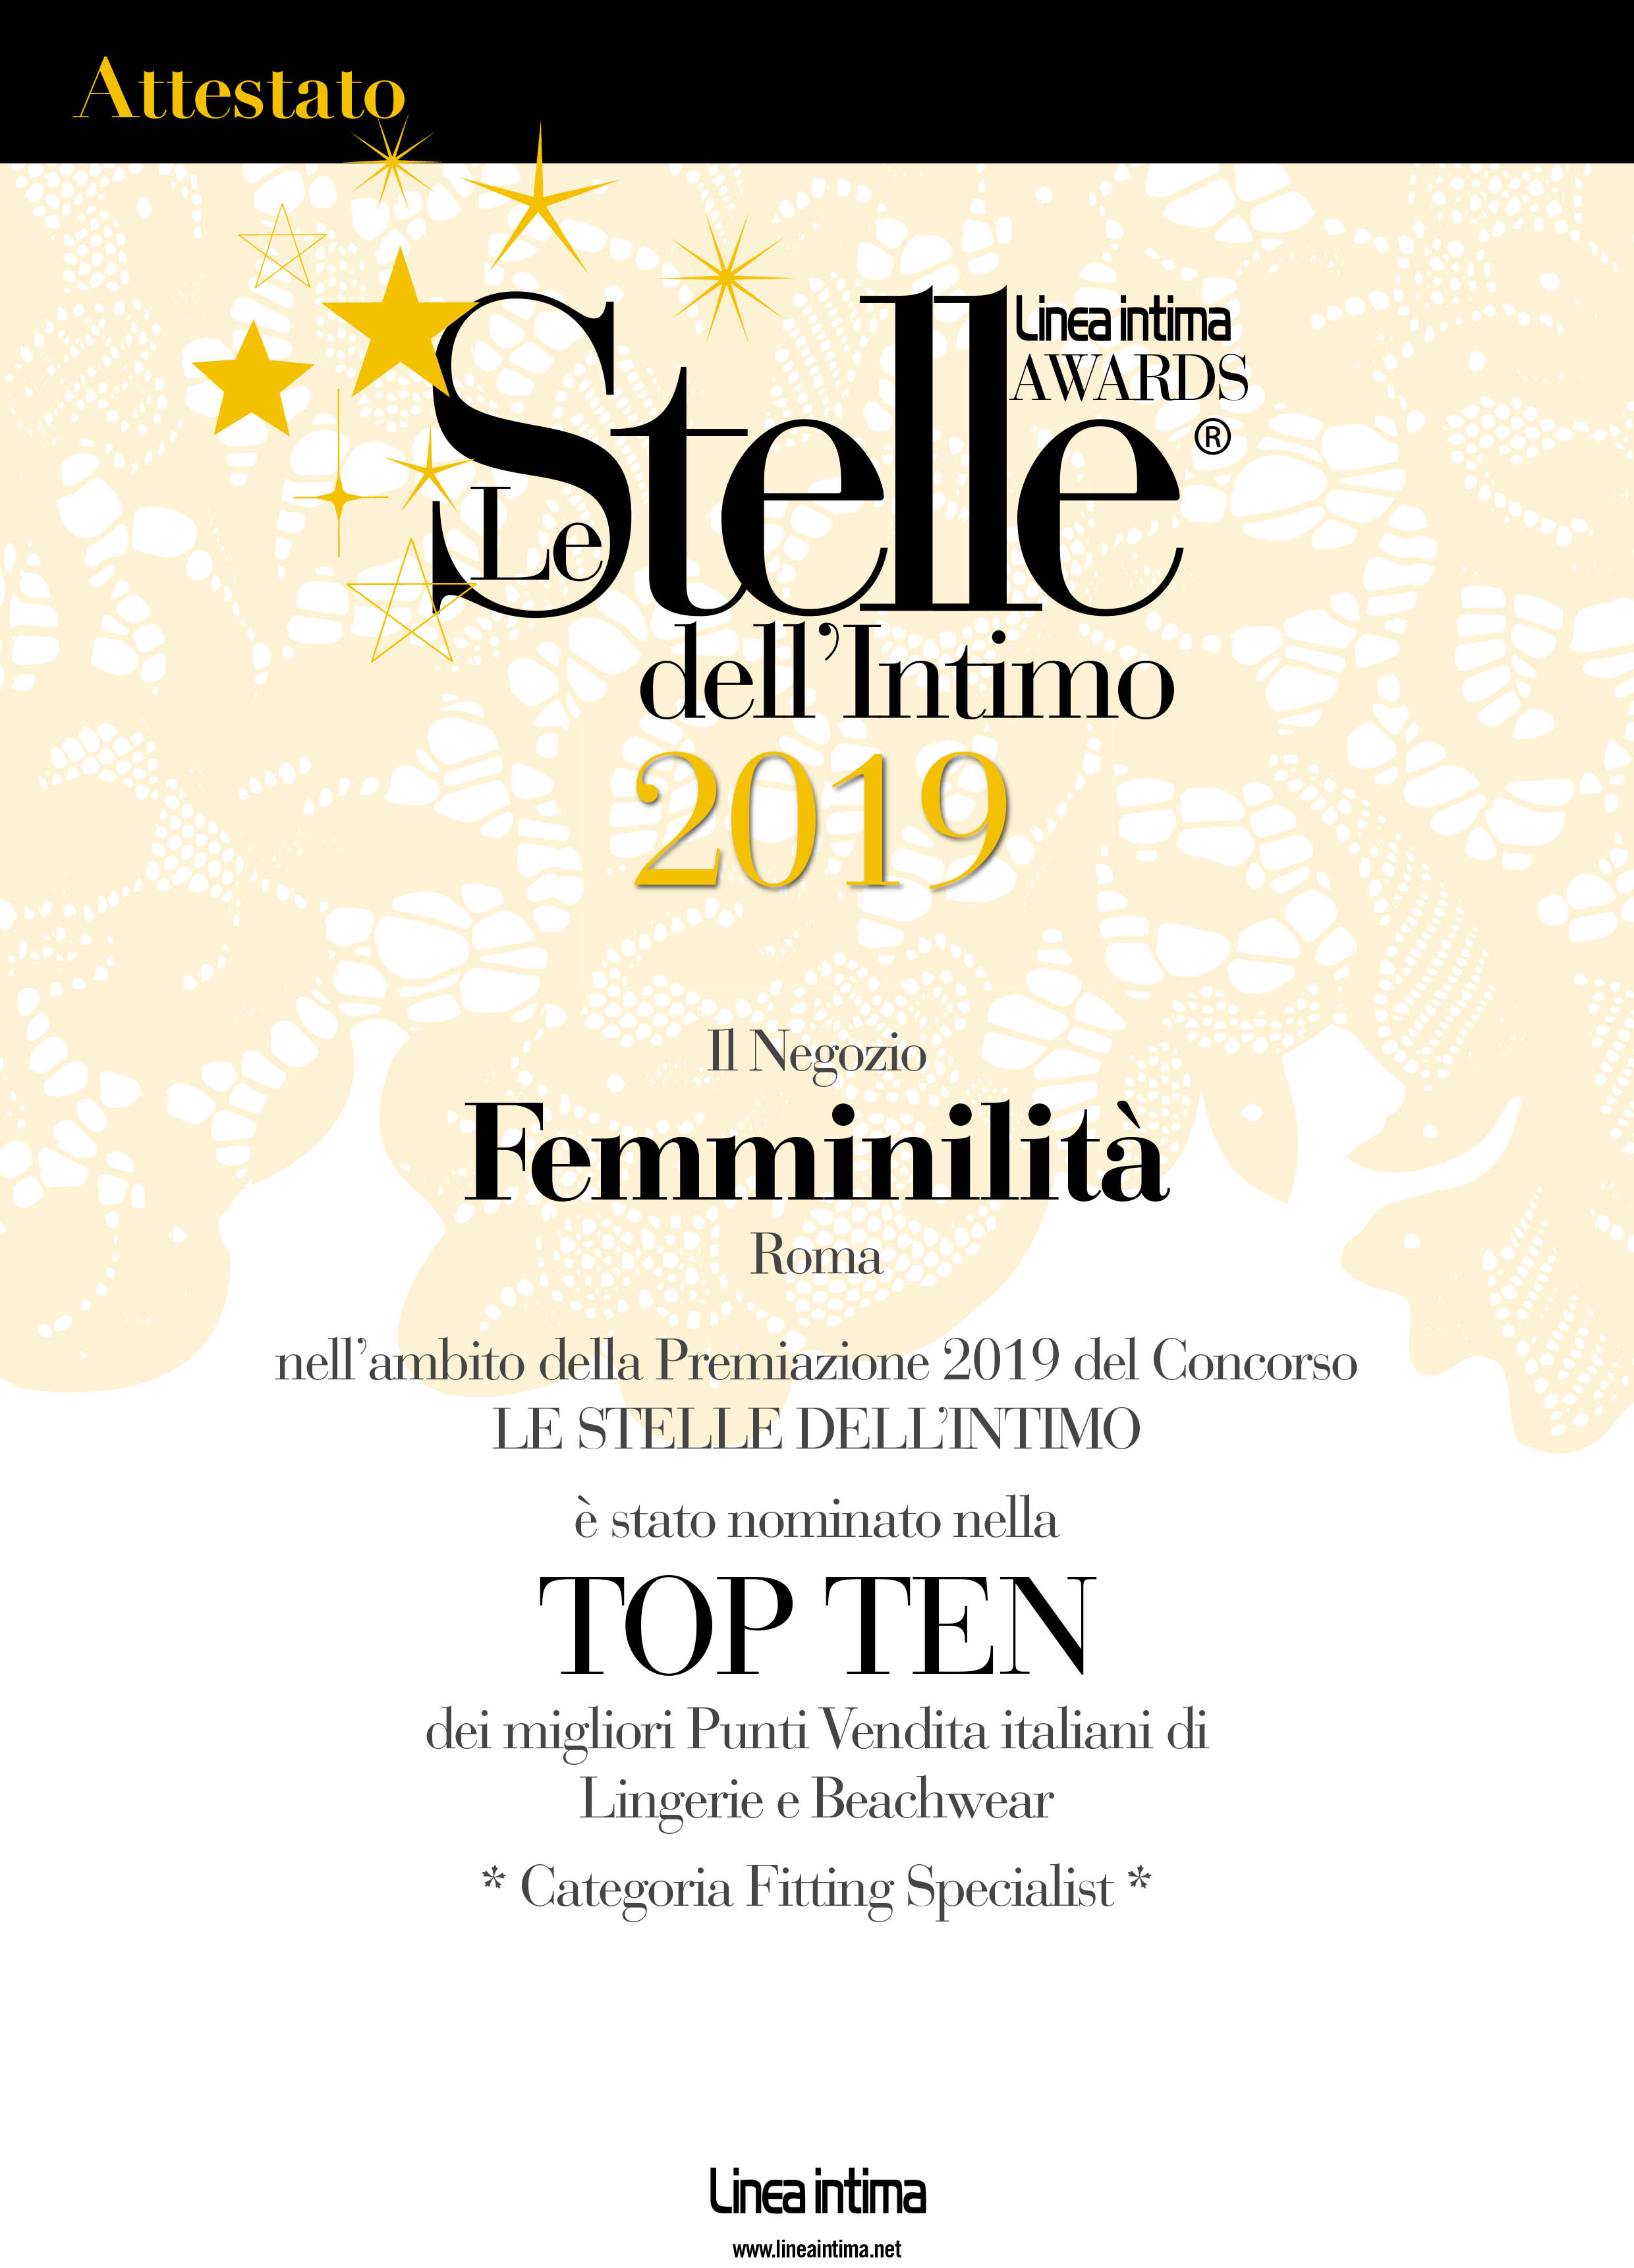 le-stelle-dell-intimo-2019-top-ten